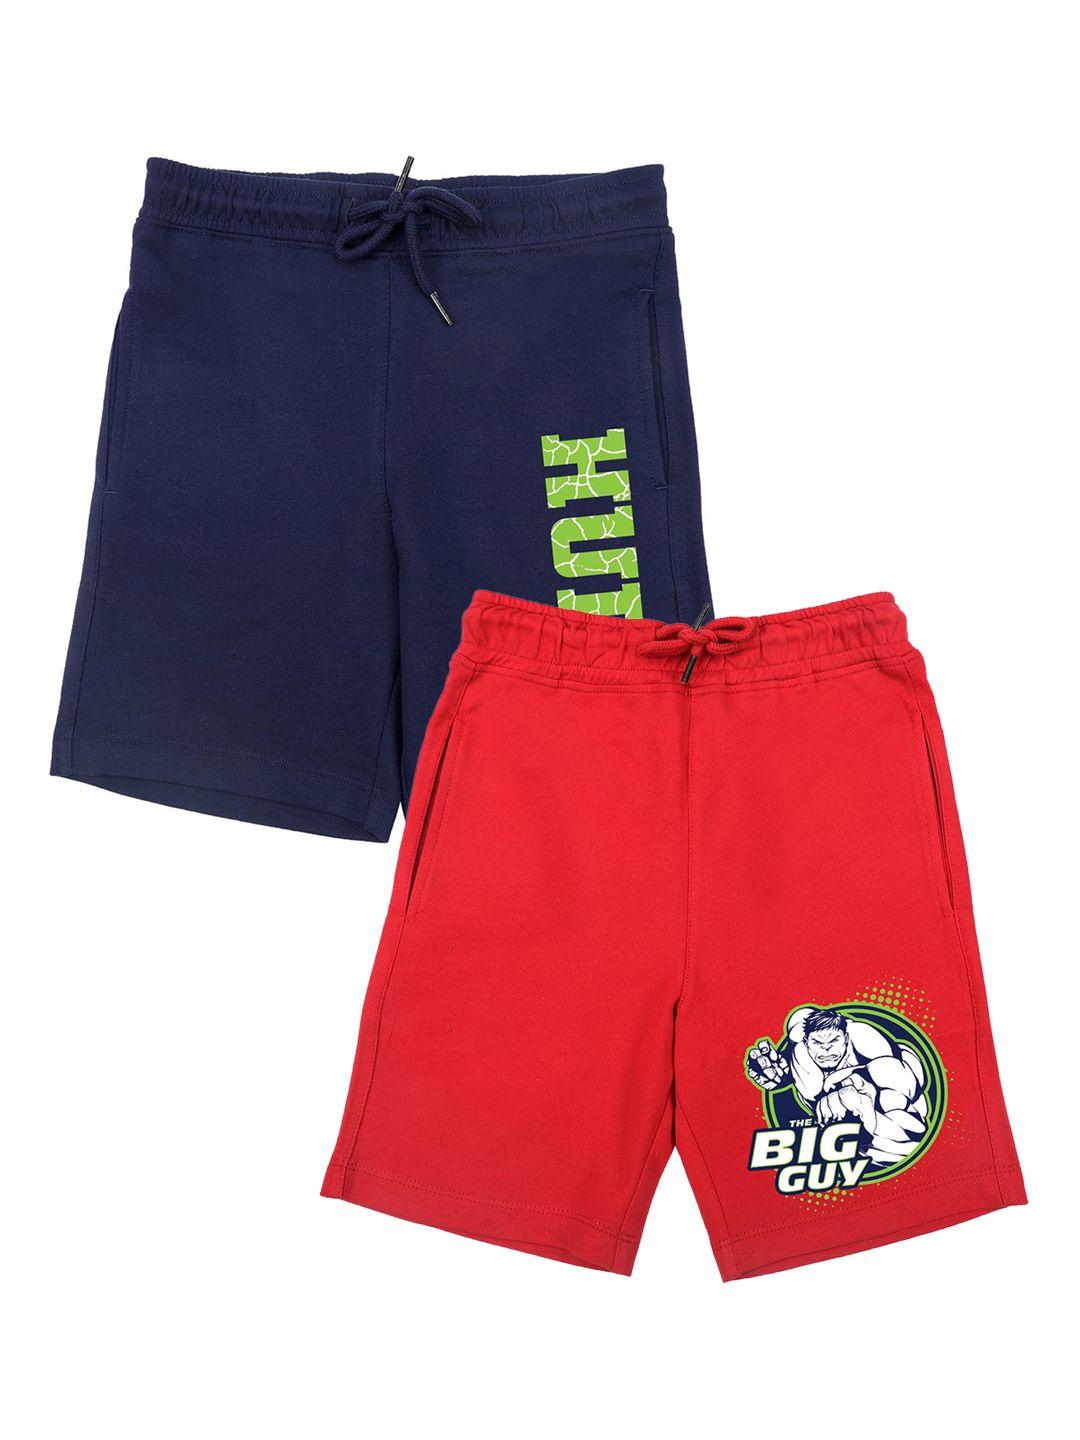 marvel by wear your mind boys pack of 2 hulk shorts